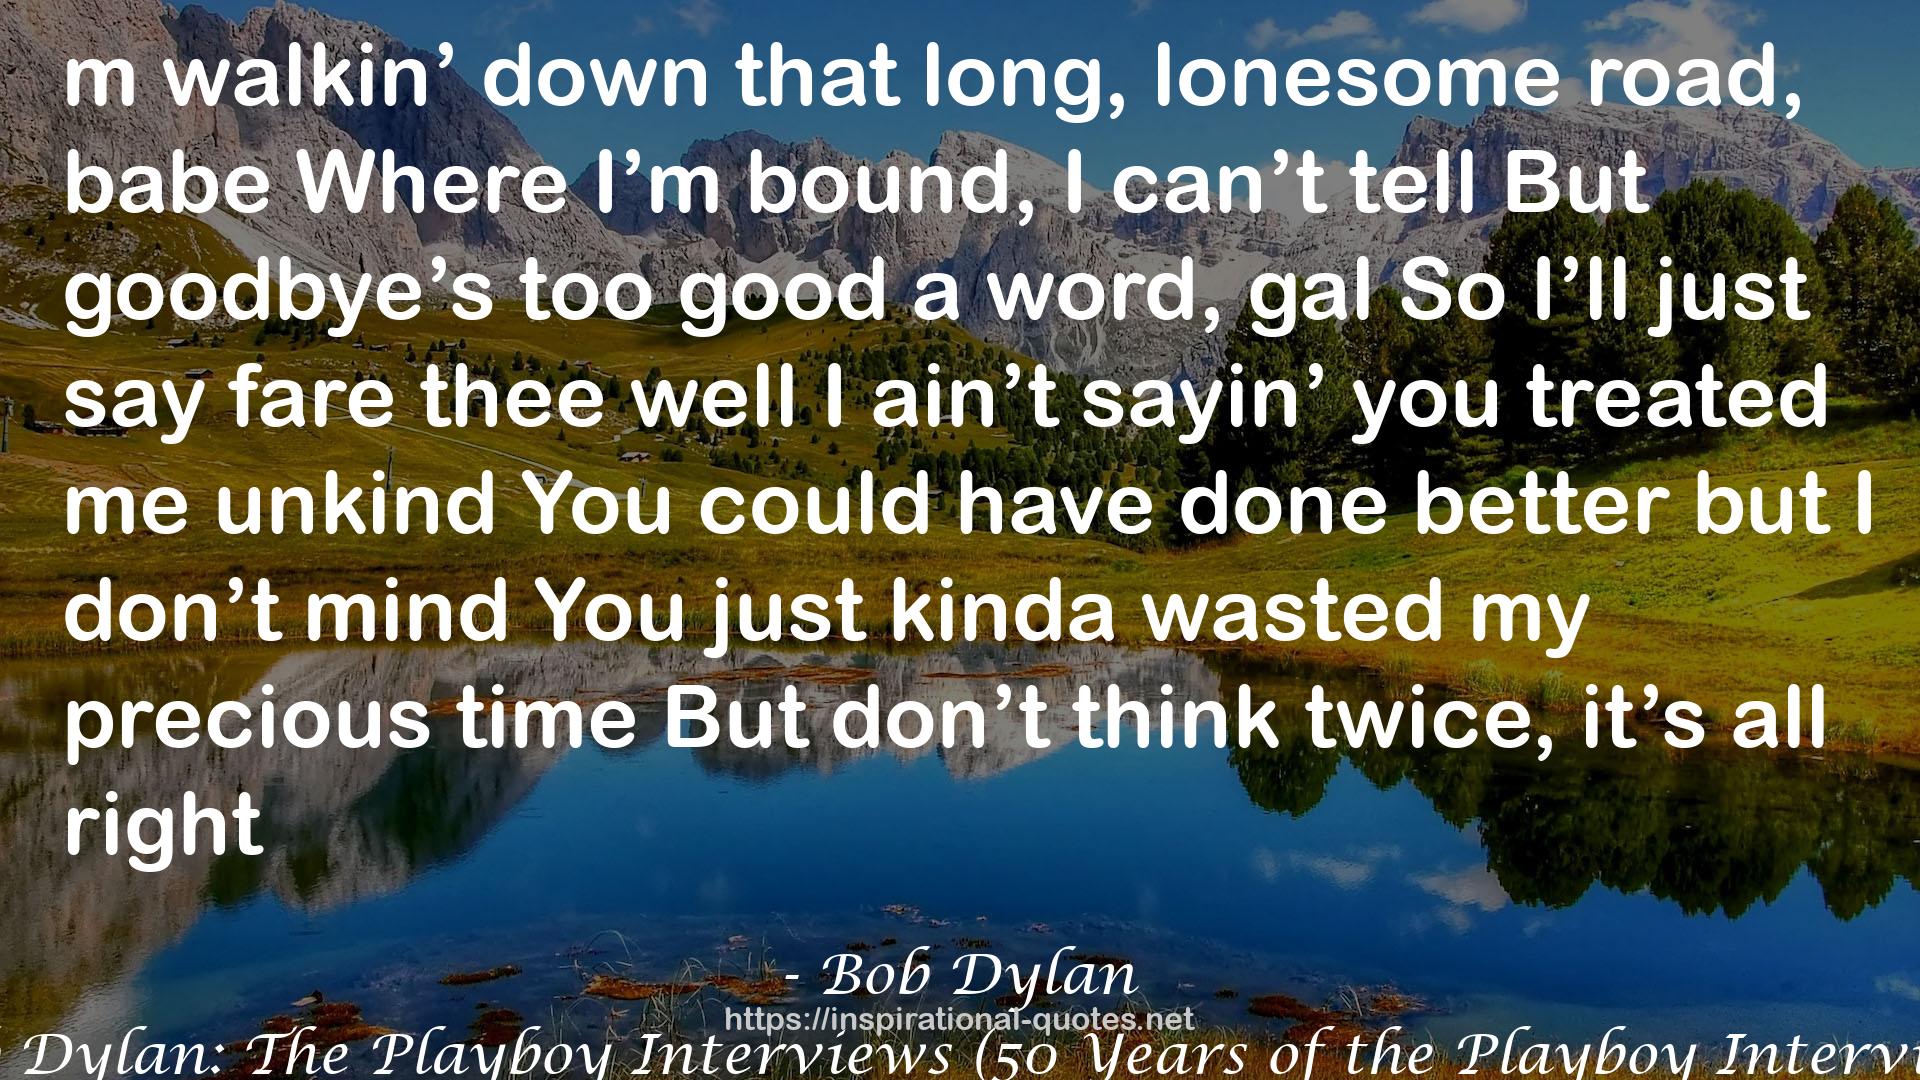 Bob Dylan: The Playboy Interviews (50 Years of the Playboy Interview) QUOTES